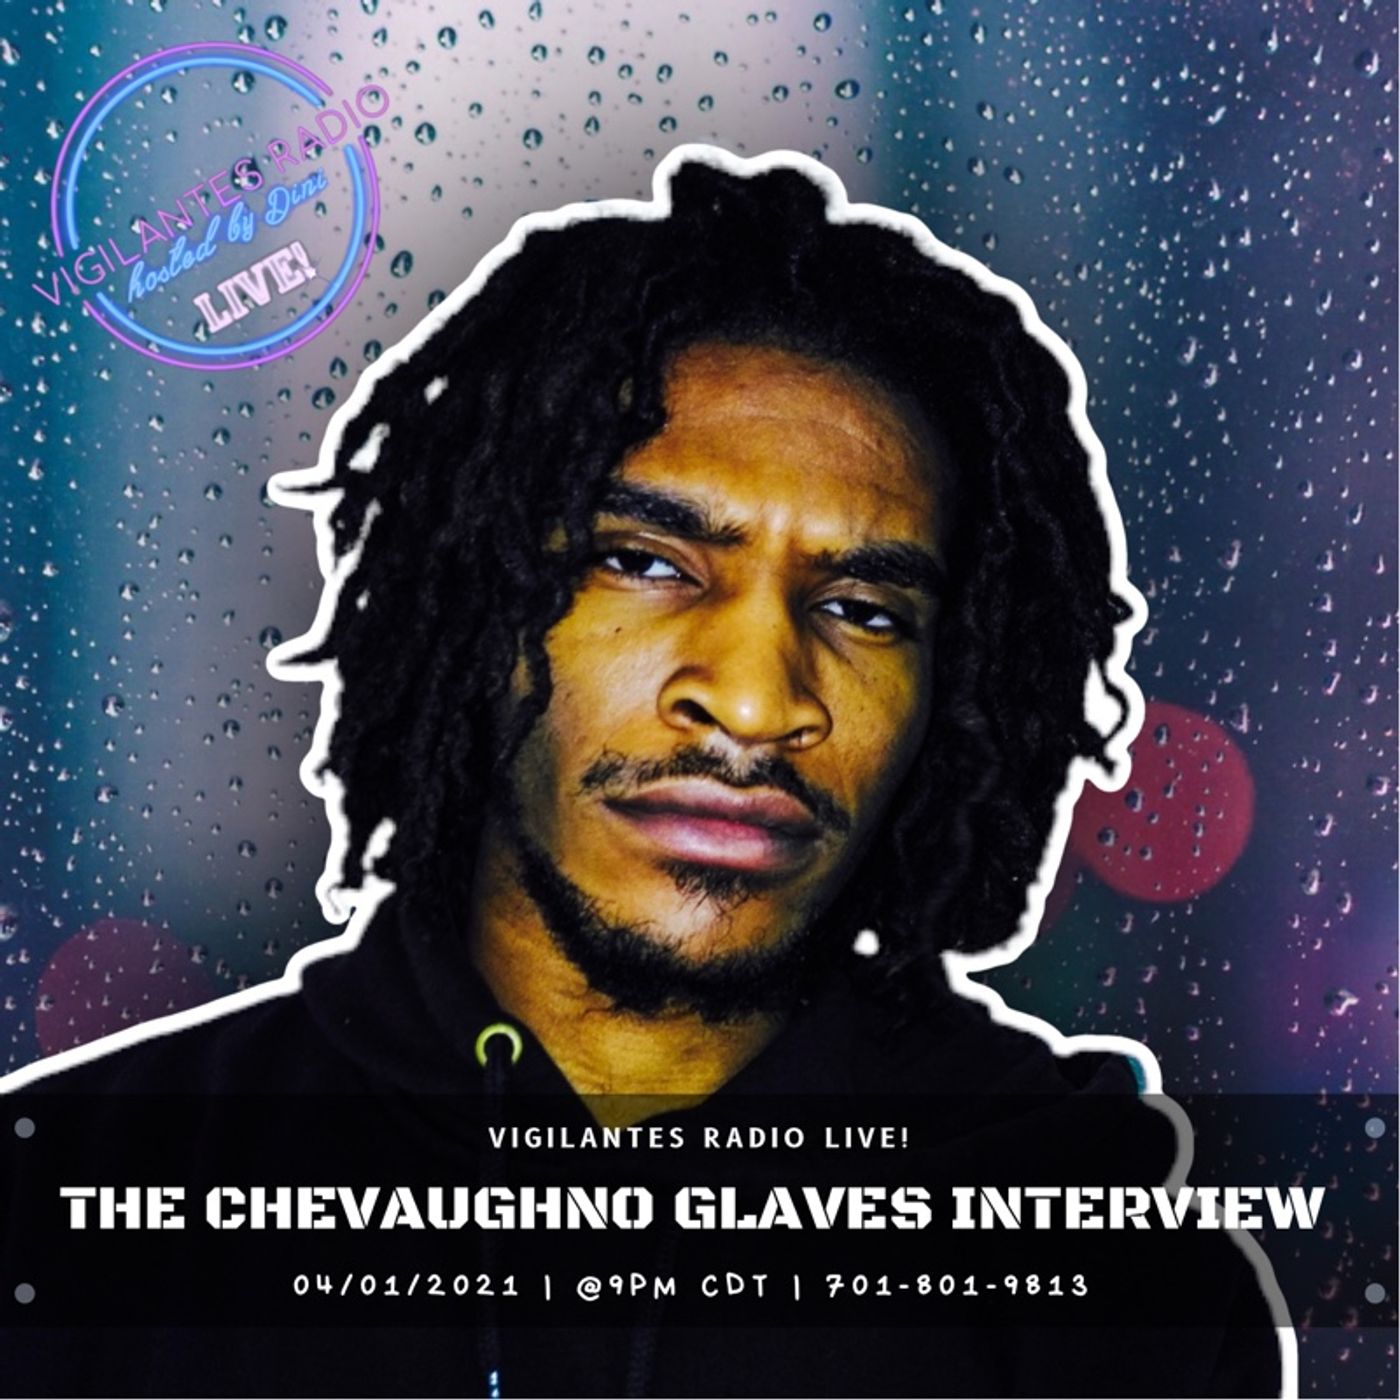 The Chevaughno Glaves Interview. Image